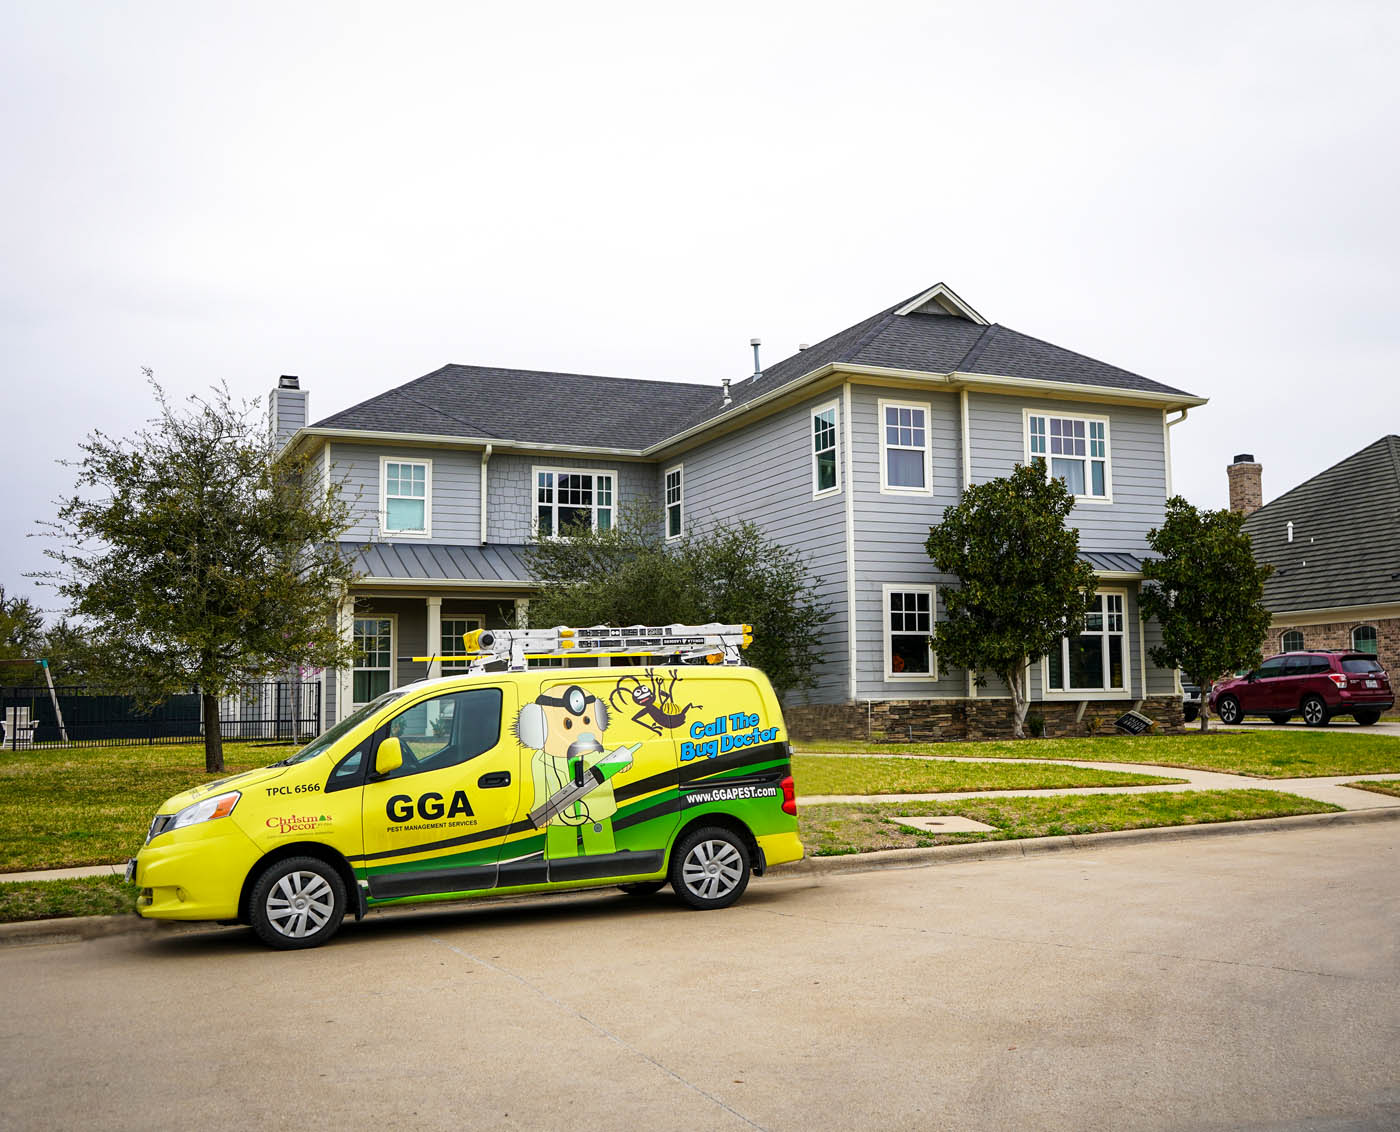 A GGA Pest Management vehicle in front of a residential home - learn how we can help with our roach exterminator services in Temple, TX.